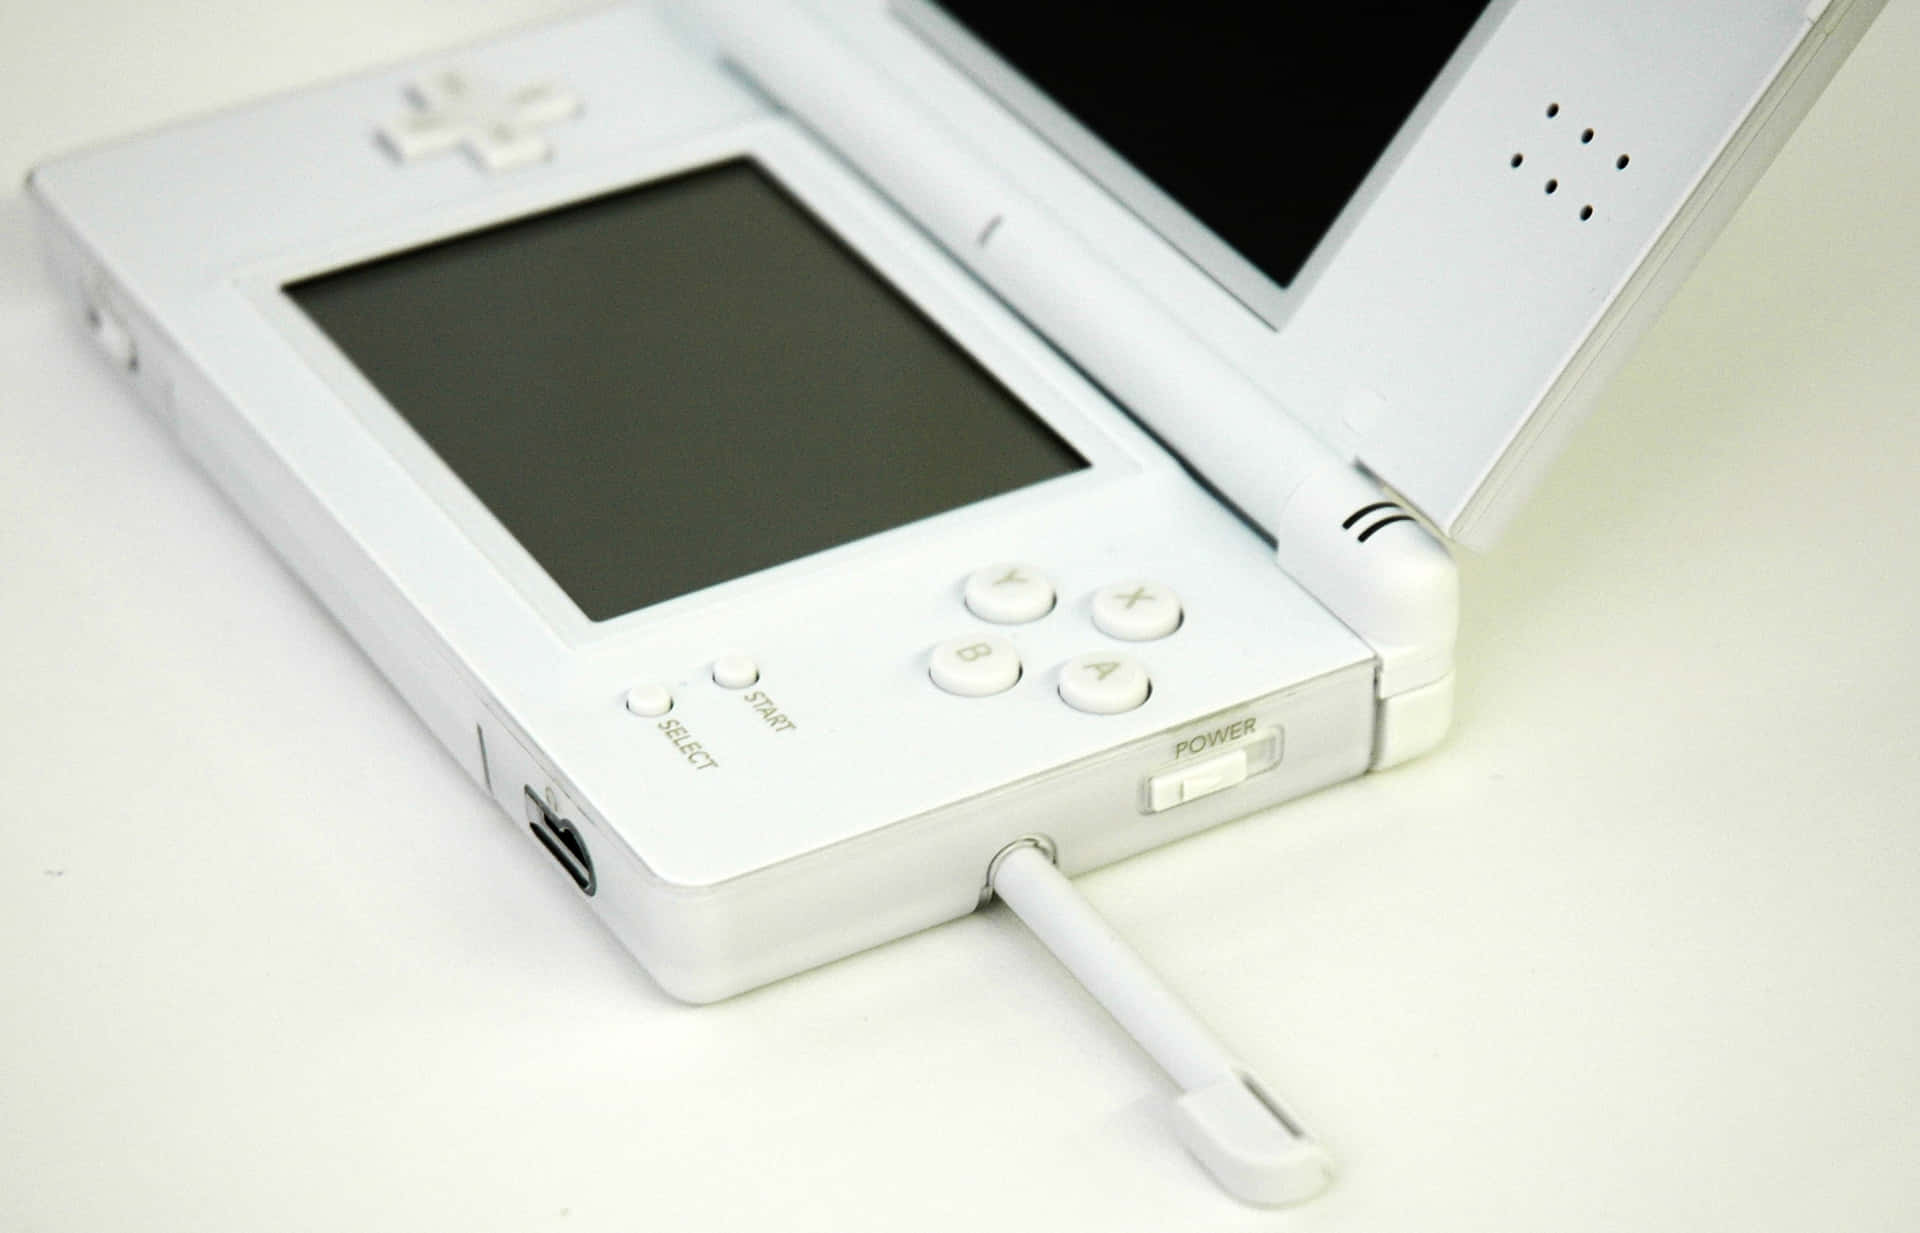 A White Nintendo Ds Is Sitting On A White Surface